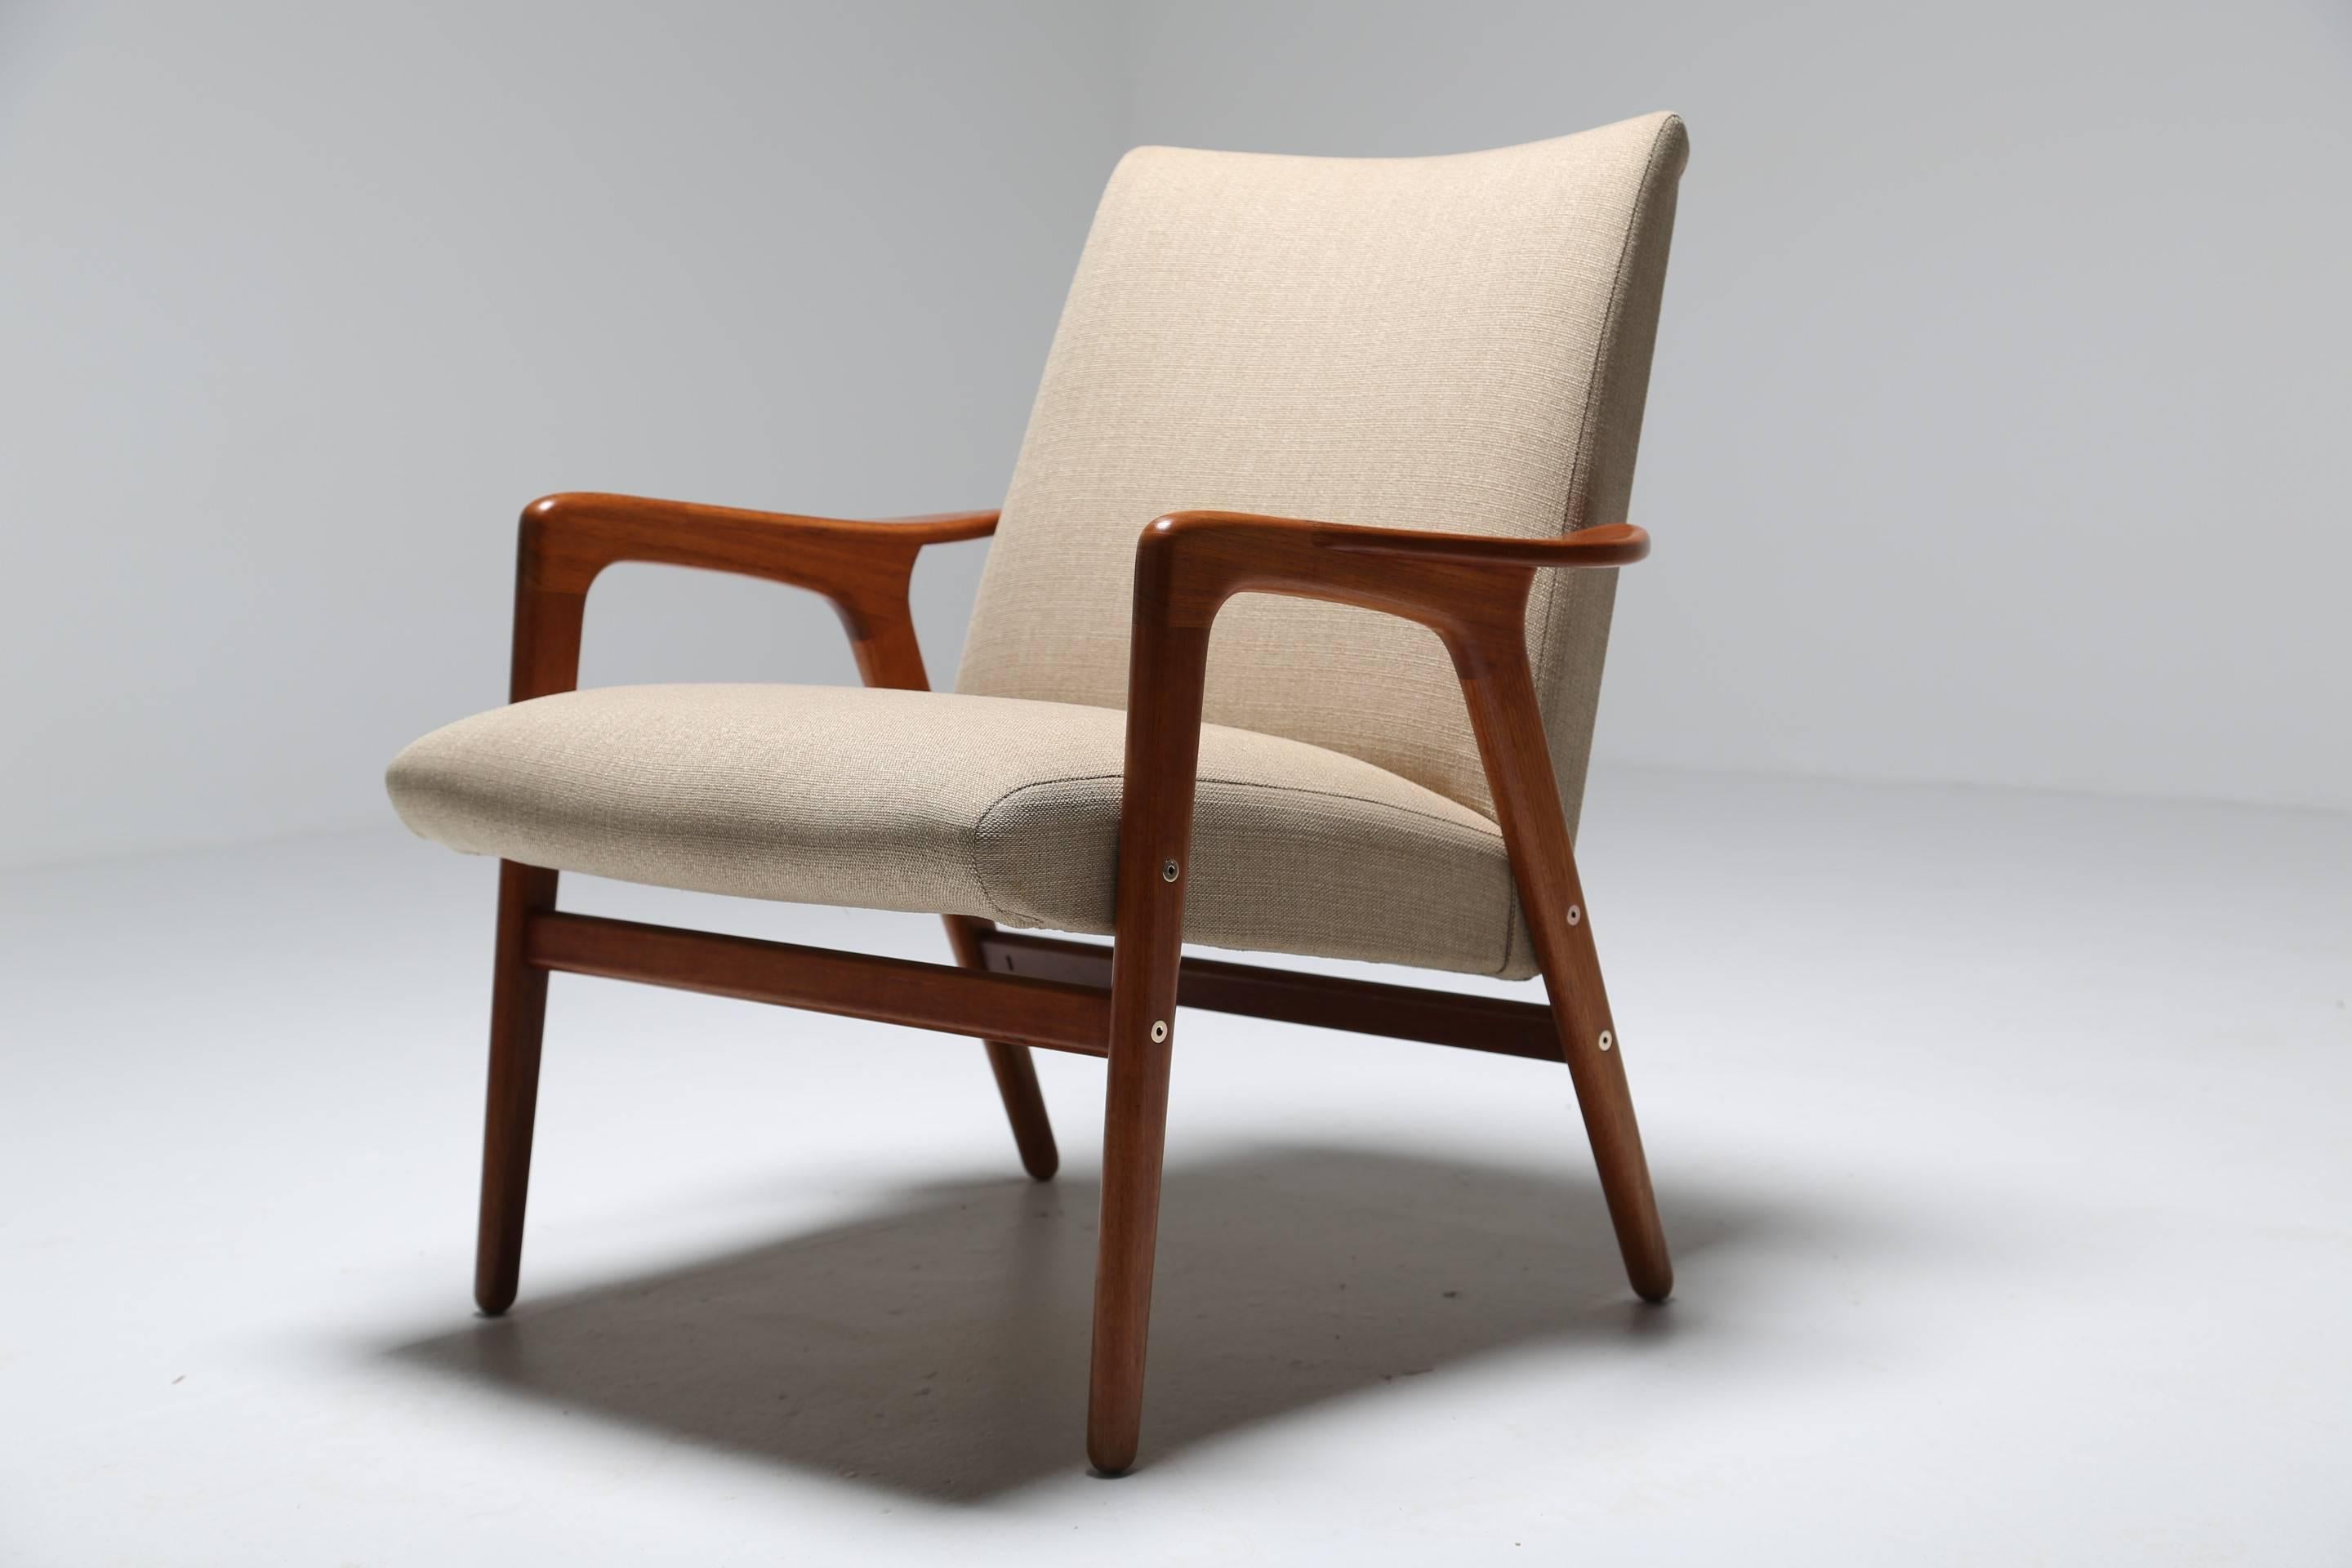 Alf Svensson designed this chic armchair for DUX circa 1960. This super cute Scandinavian teak frame piece is a medium to small sized chair and would be perfect in a library, study or bedroom. Completely refurbished to an excellent standard. 